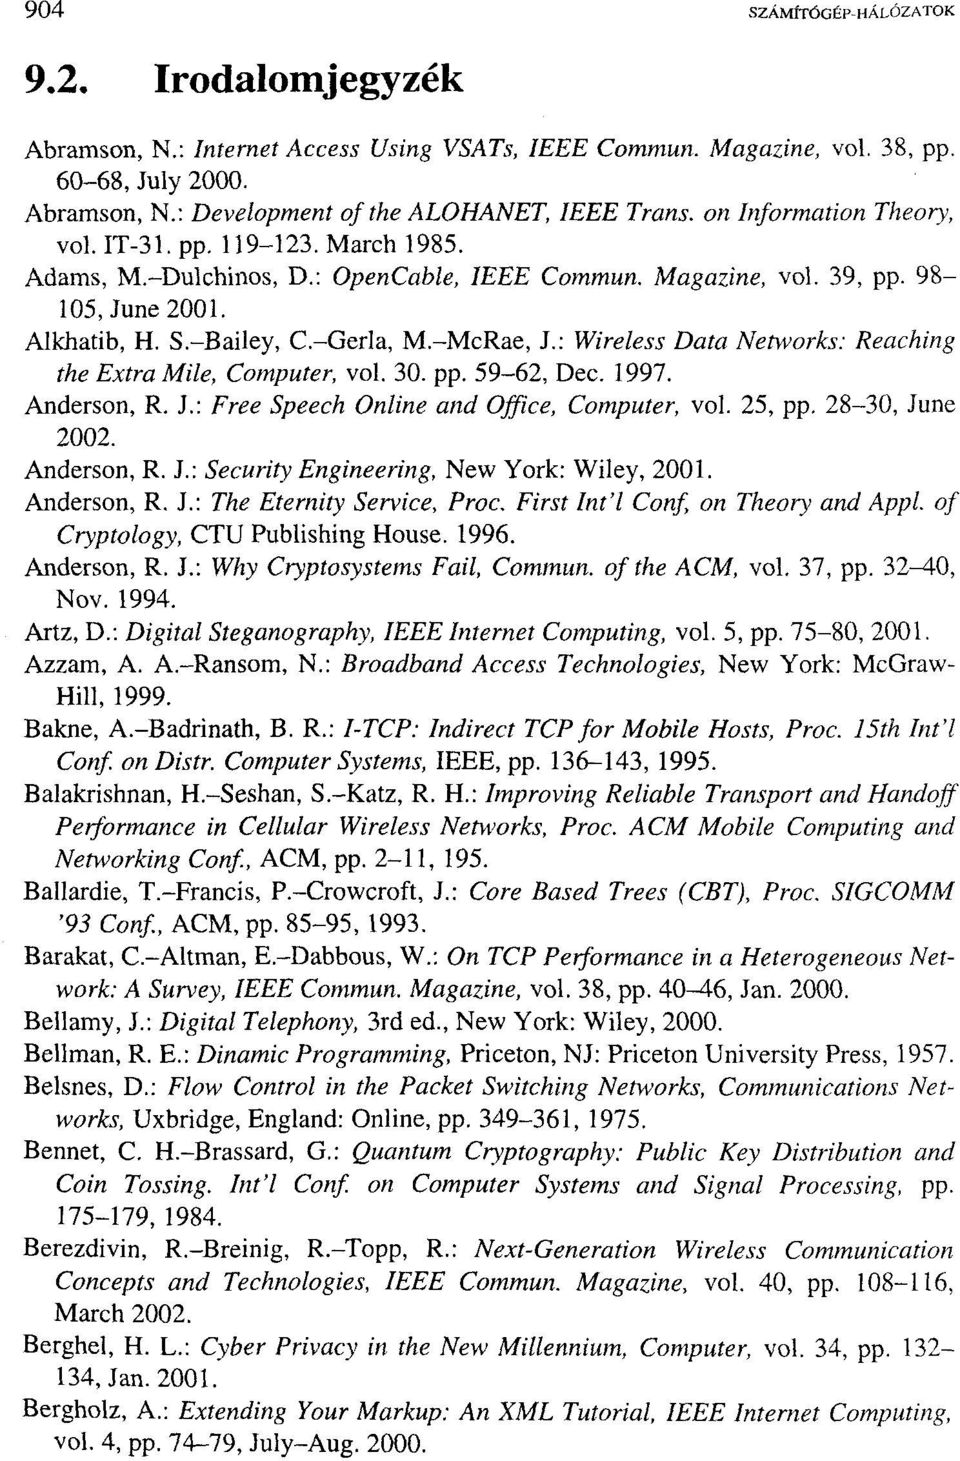 : Wireless Data Networks: Reaching the Extra Mile, Computer, vol. 30. pp. 59-62, Dec. 1997. Anderson, R. J.: Free Speech Online and Office, Computer, vol. 25, pp. 28-30, June 2002. Anderson, R. J.: Security Engineering, New York: Wiley, 2001.